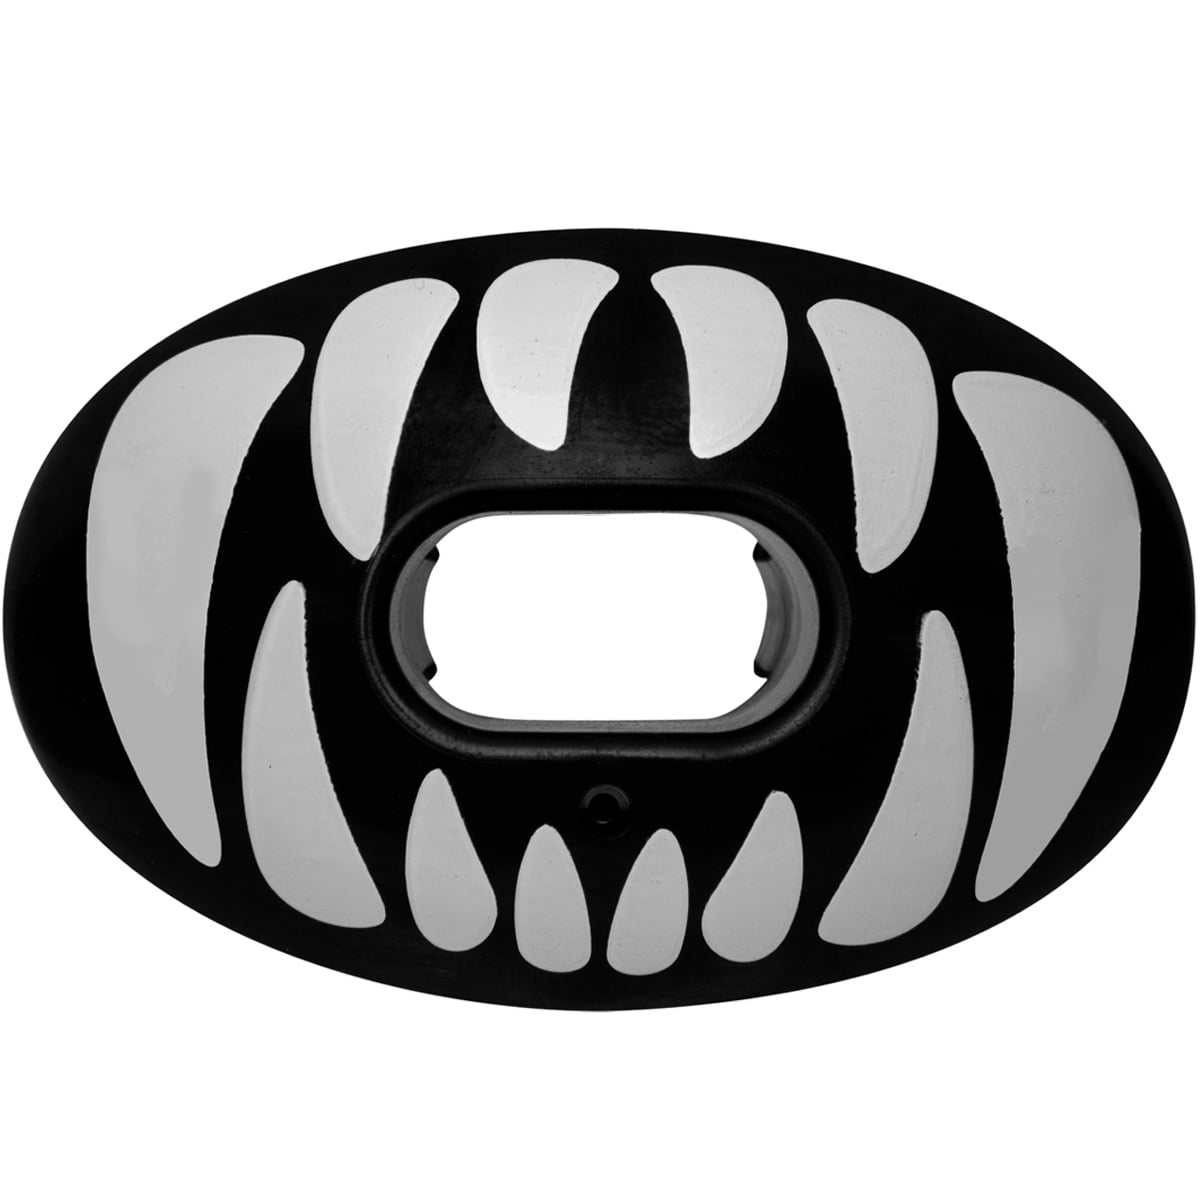 Red/Black Beast Mode lip protector mouth guard New 